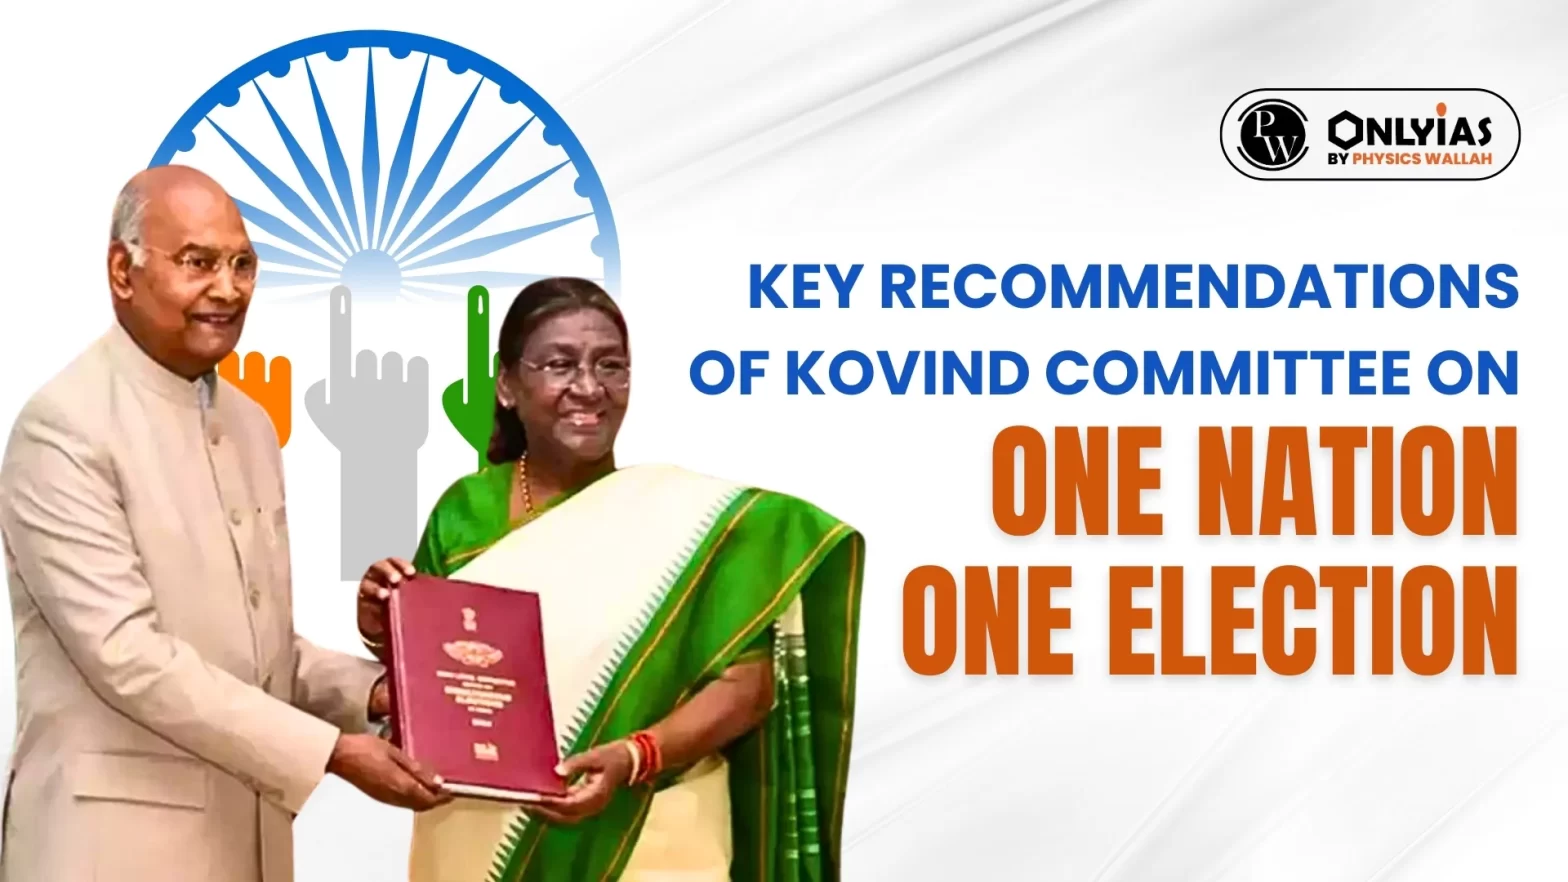 One Nation One Election: Key Highlights of the Kovind Committee Report